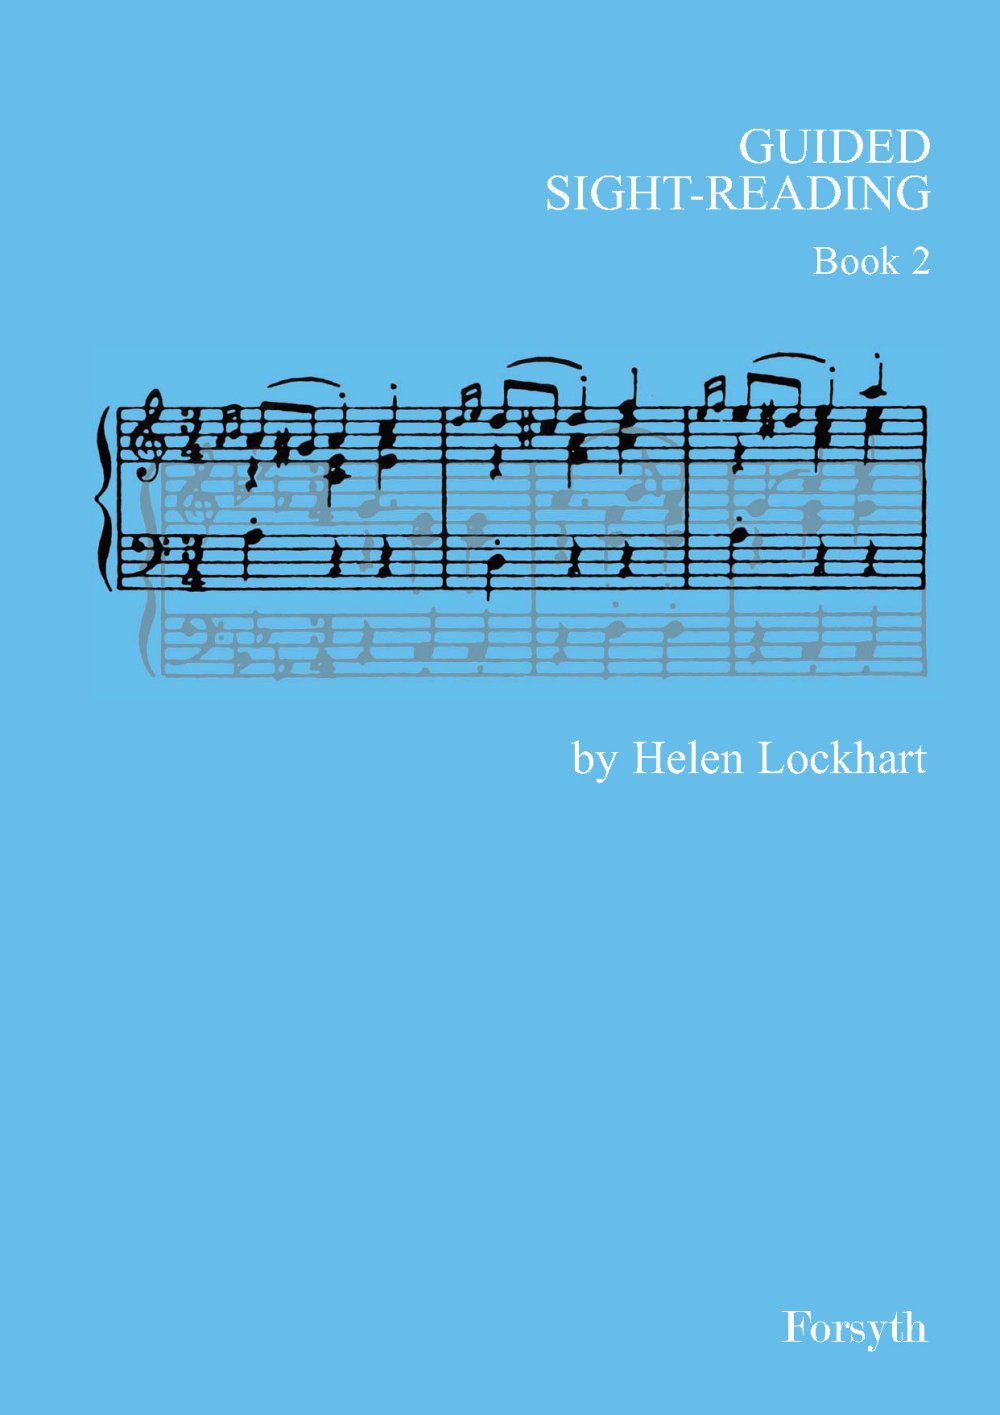 Guided Sight Reading Book 2 Lockhart Piano Sheet Music Songbook